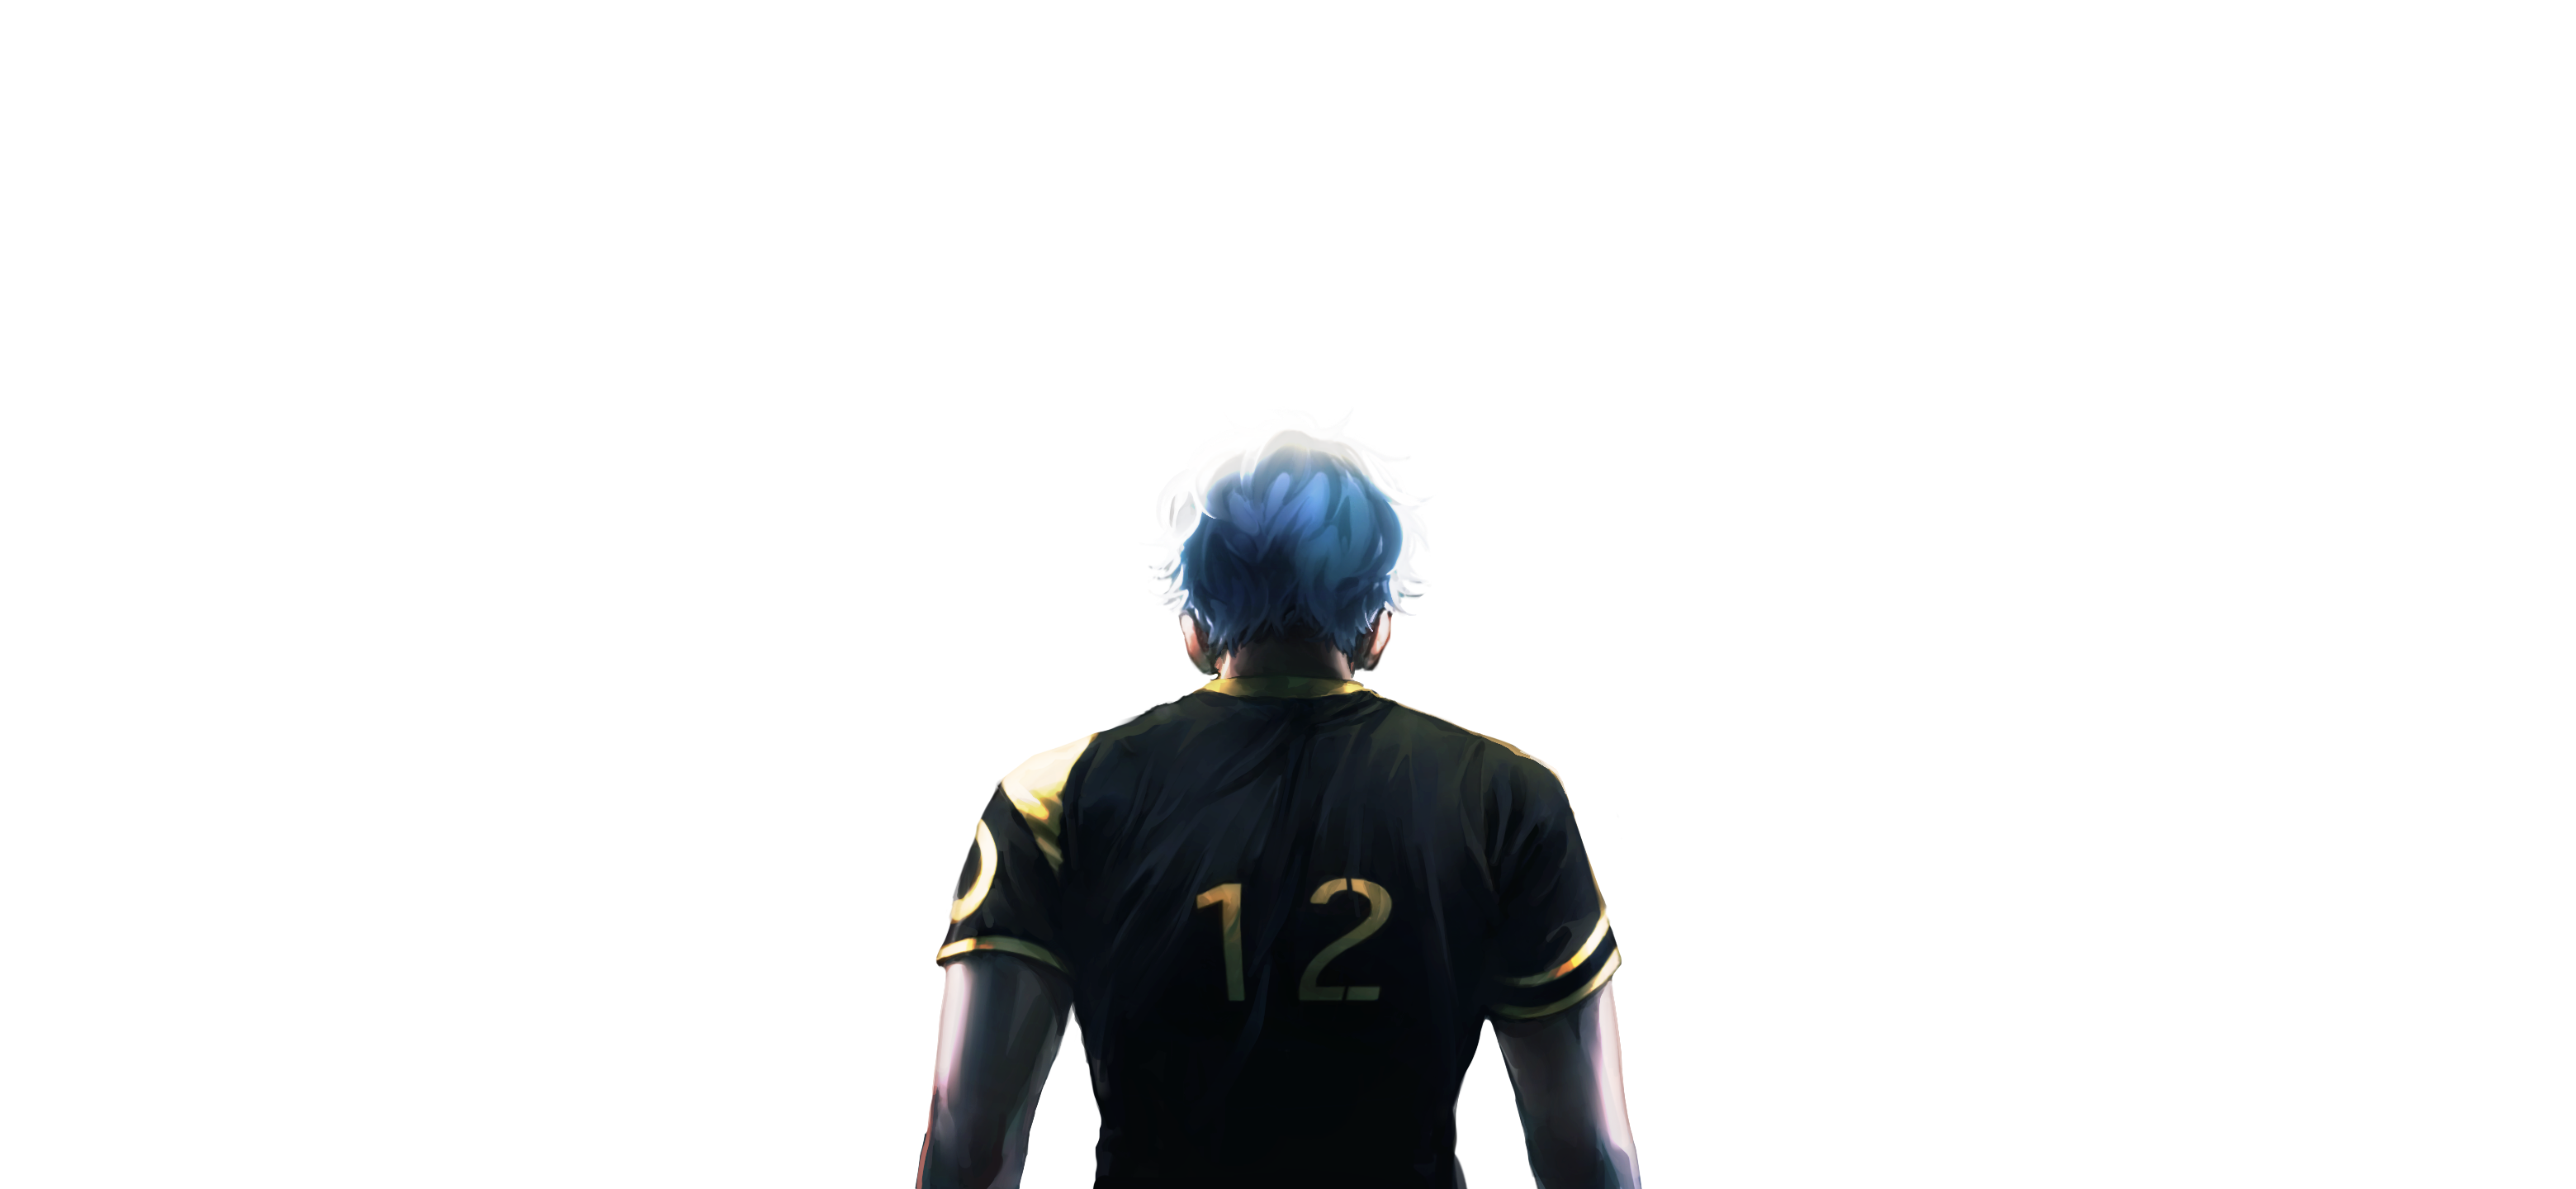 Banner image of character in volleyball stadium